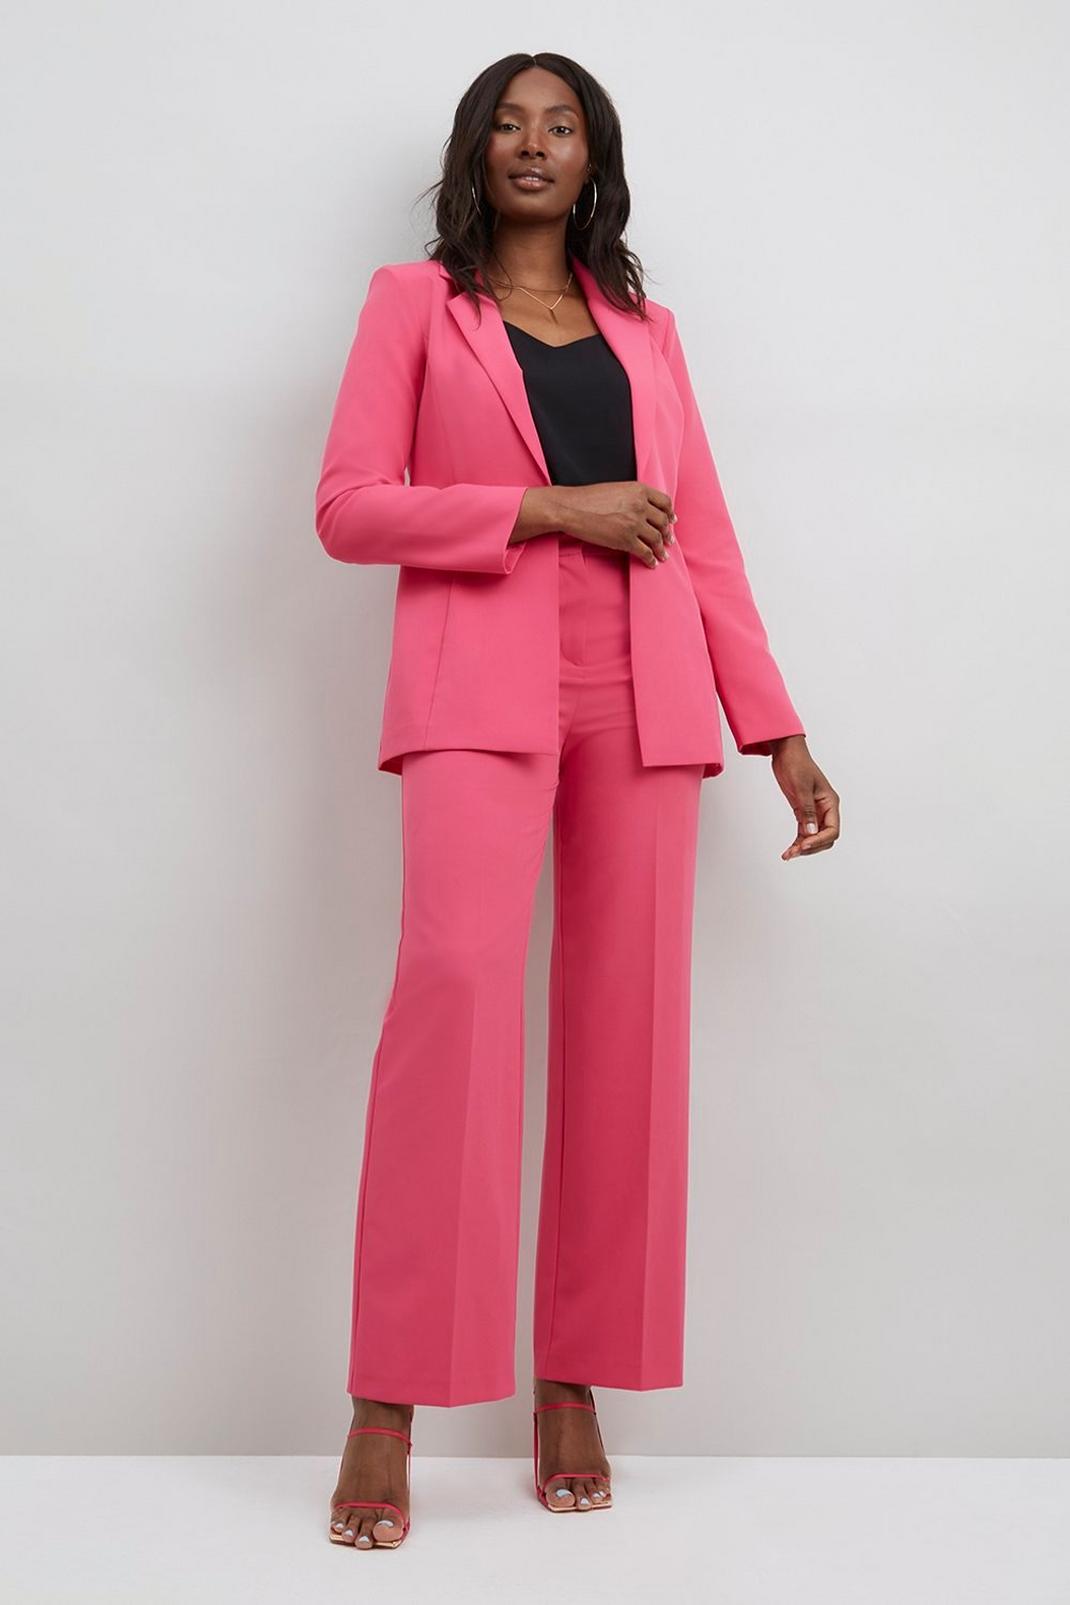 Ladies Pants Suit for Business Casual Long Sleeve Suits Button